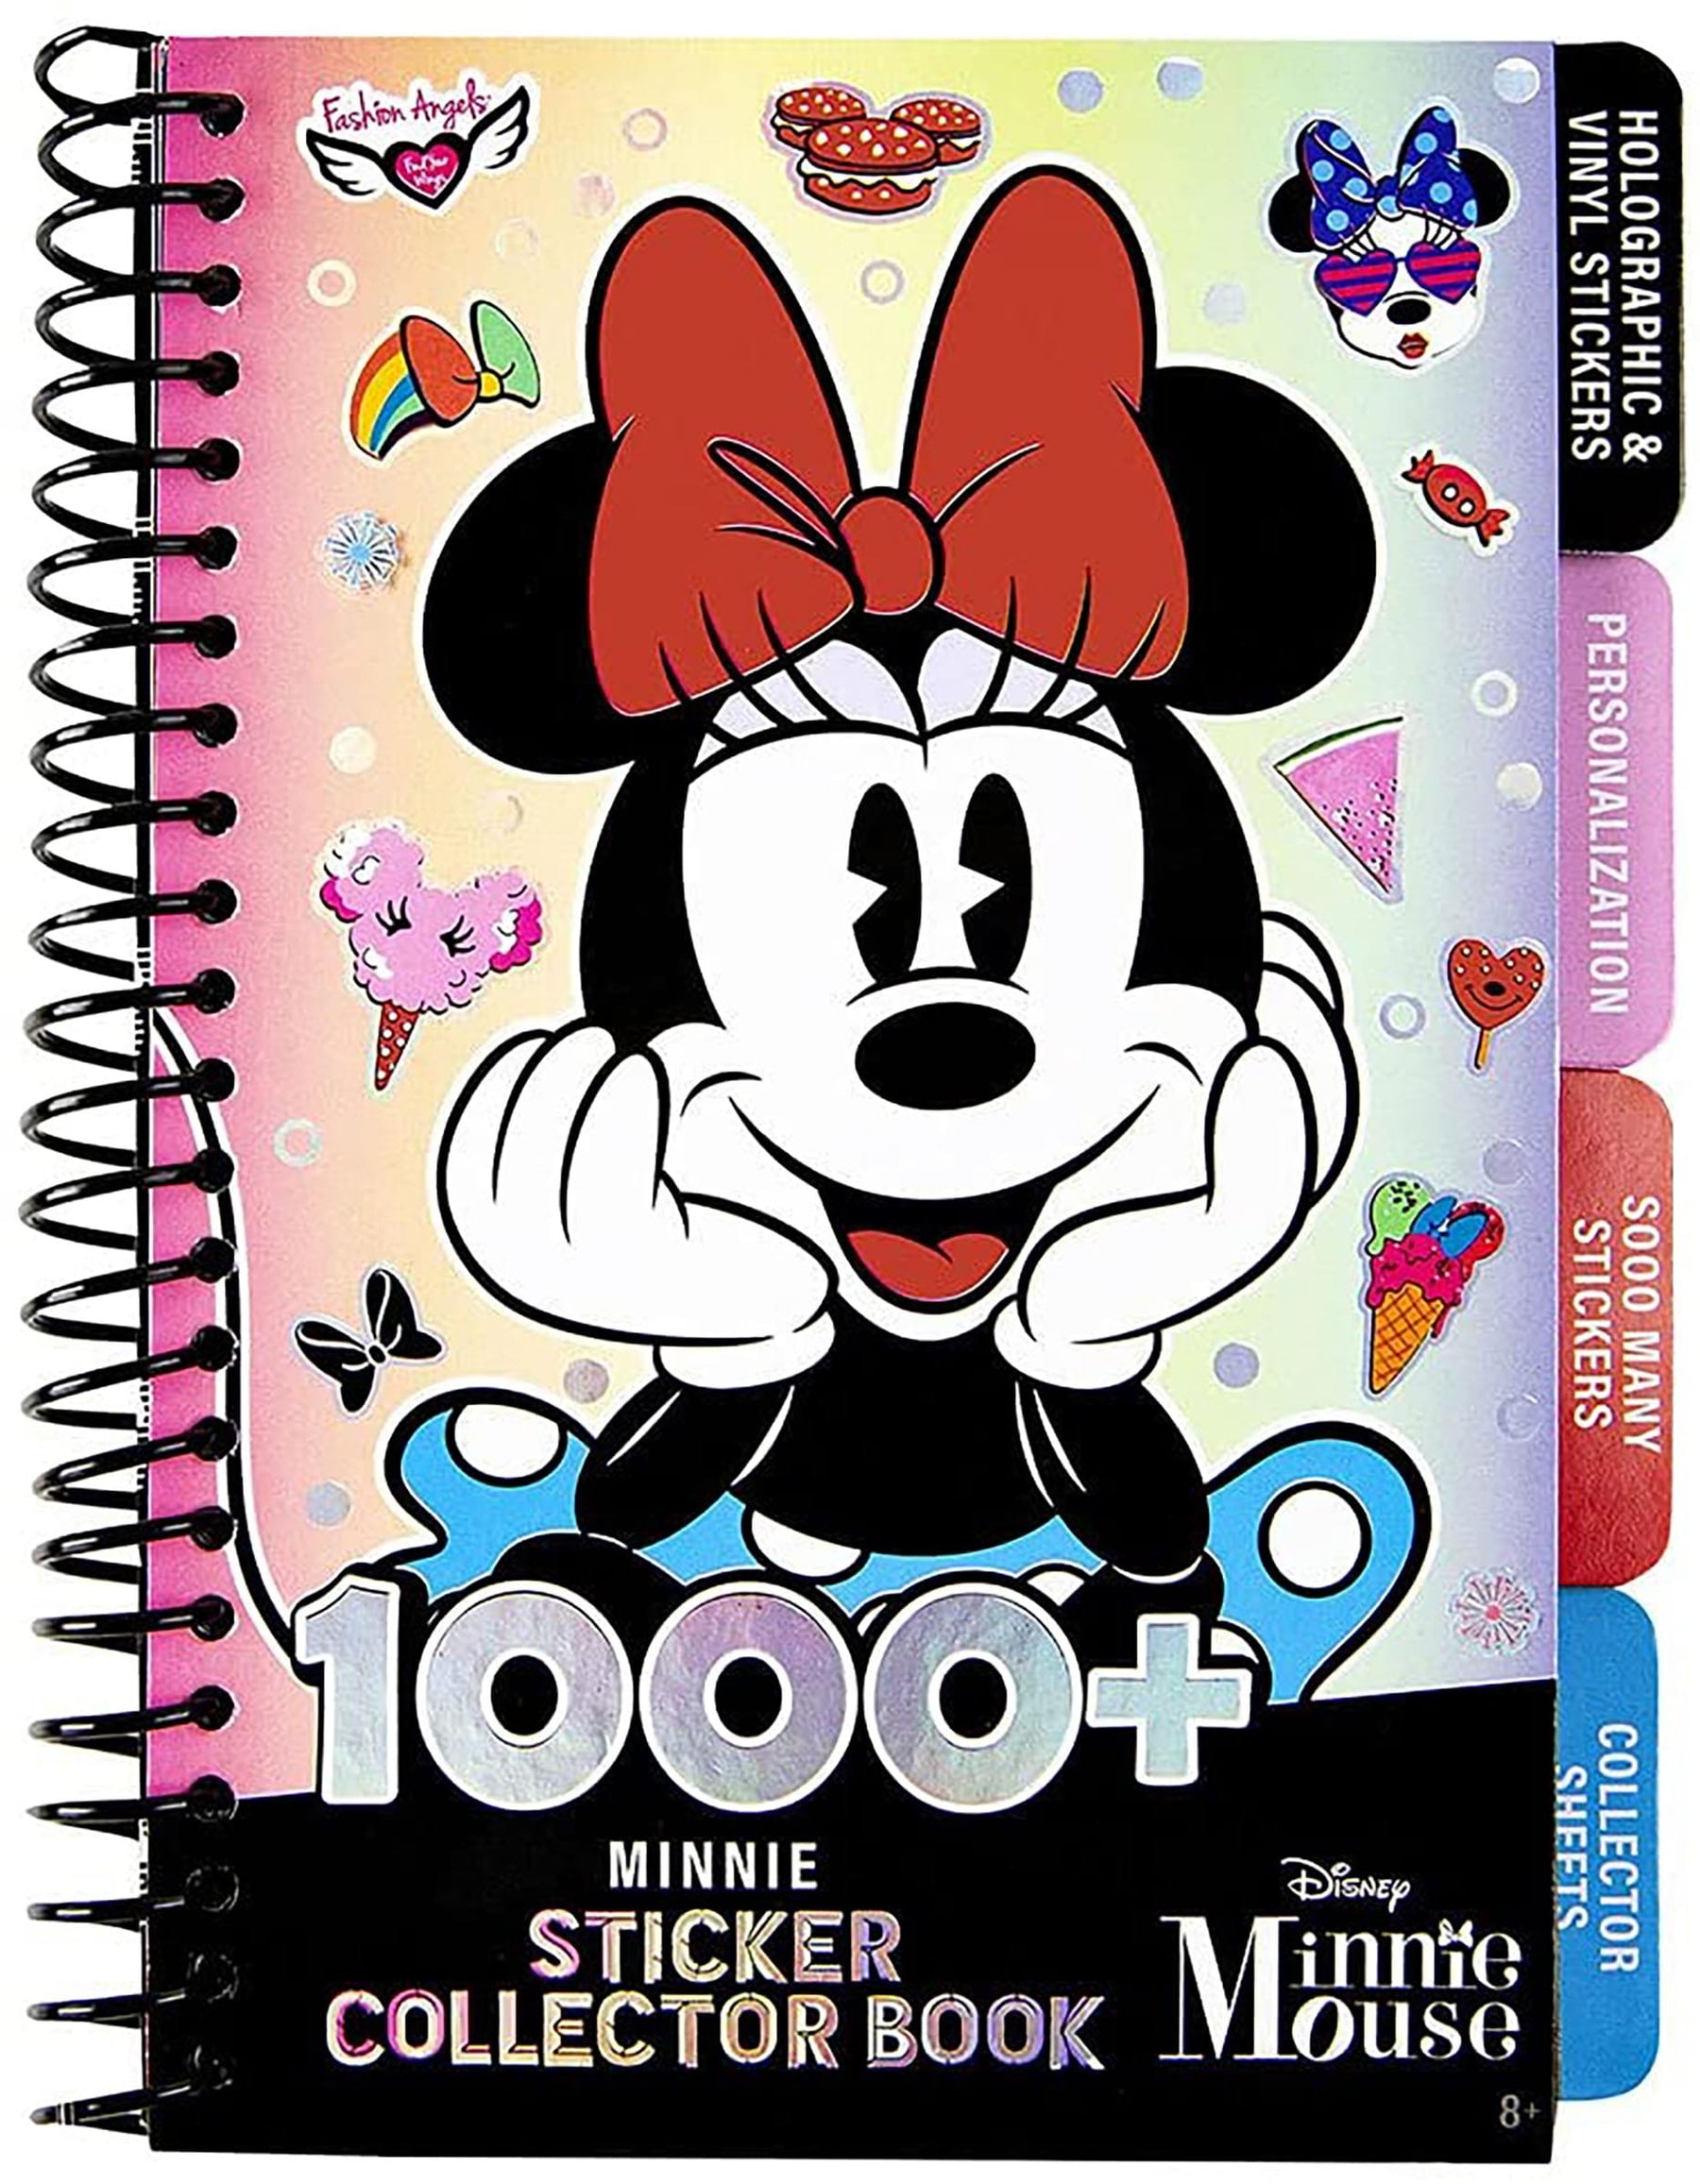 Disney Minnie Mouse Fashion Angels 1000+ Stickers & Collector Book